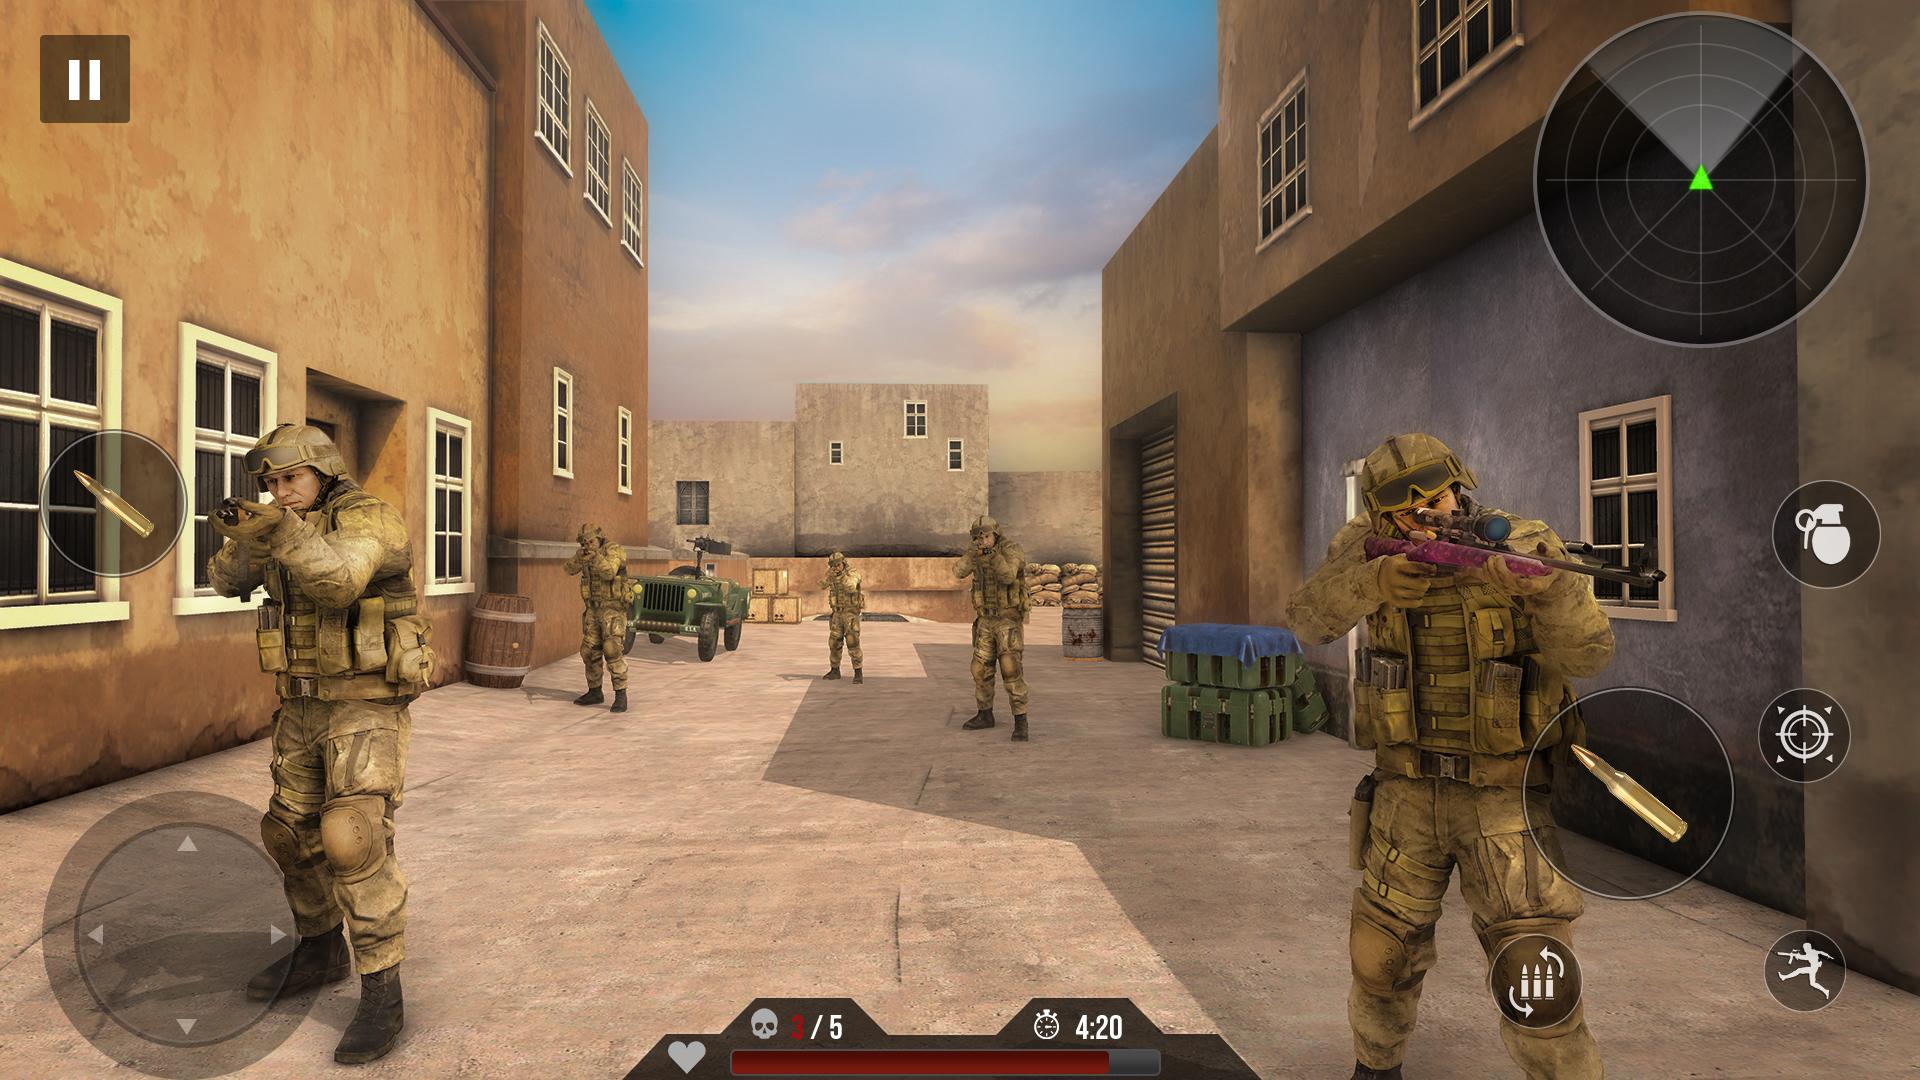 FPS Encounter Strike: Free Shooting Games Offline for PC - Free Download &  Install on Windows PC, Mac